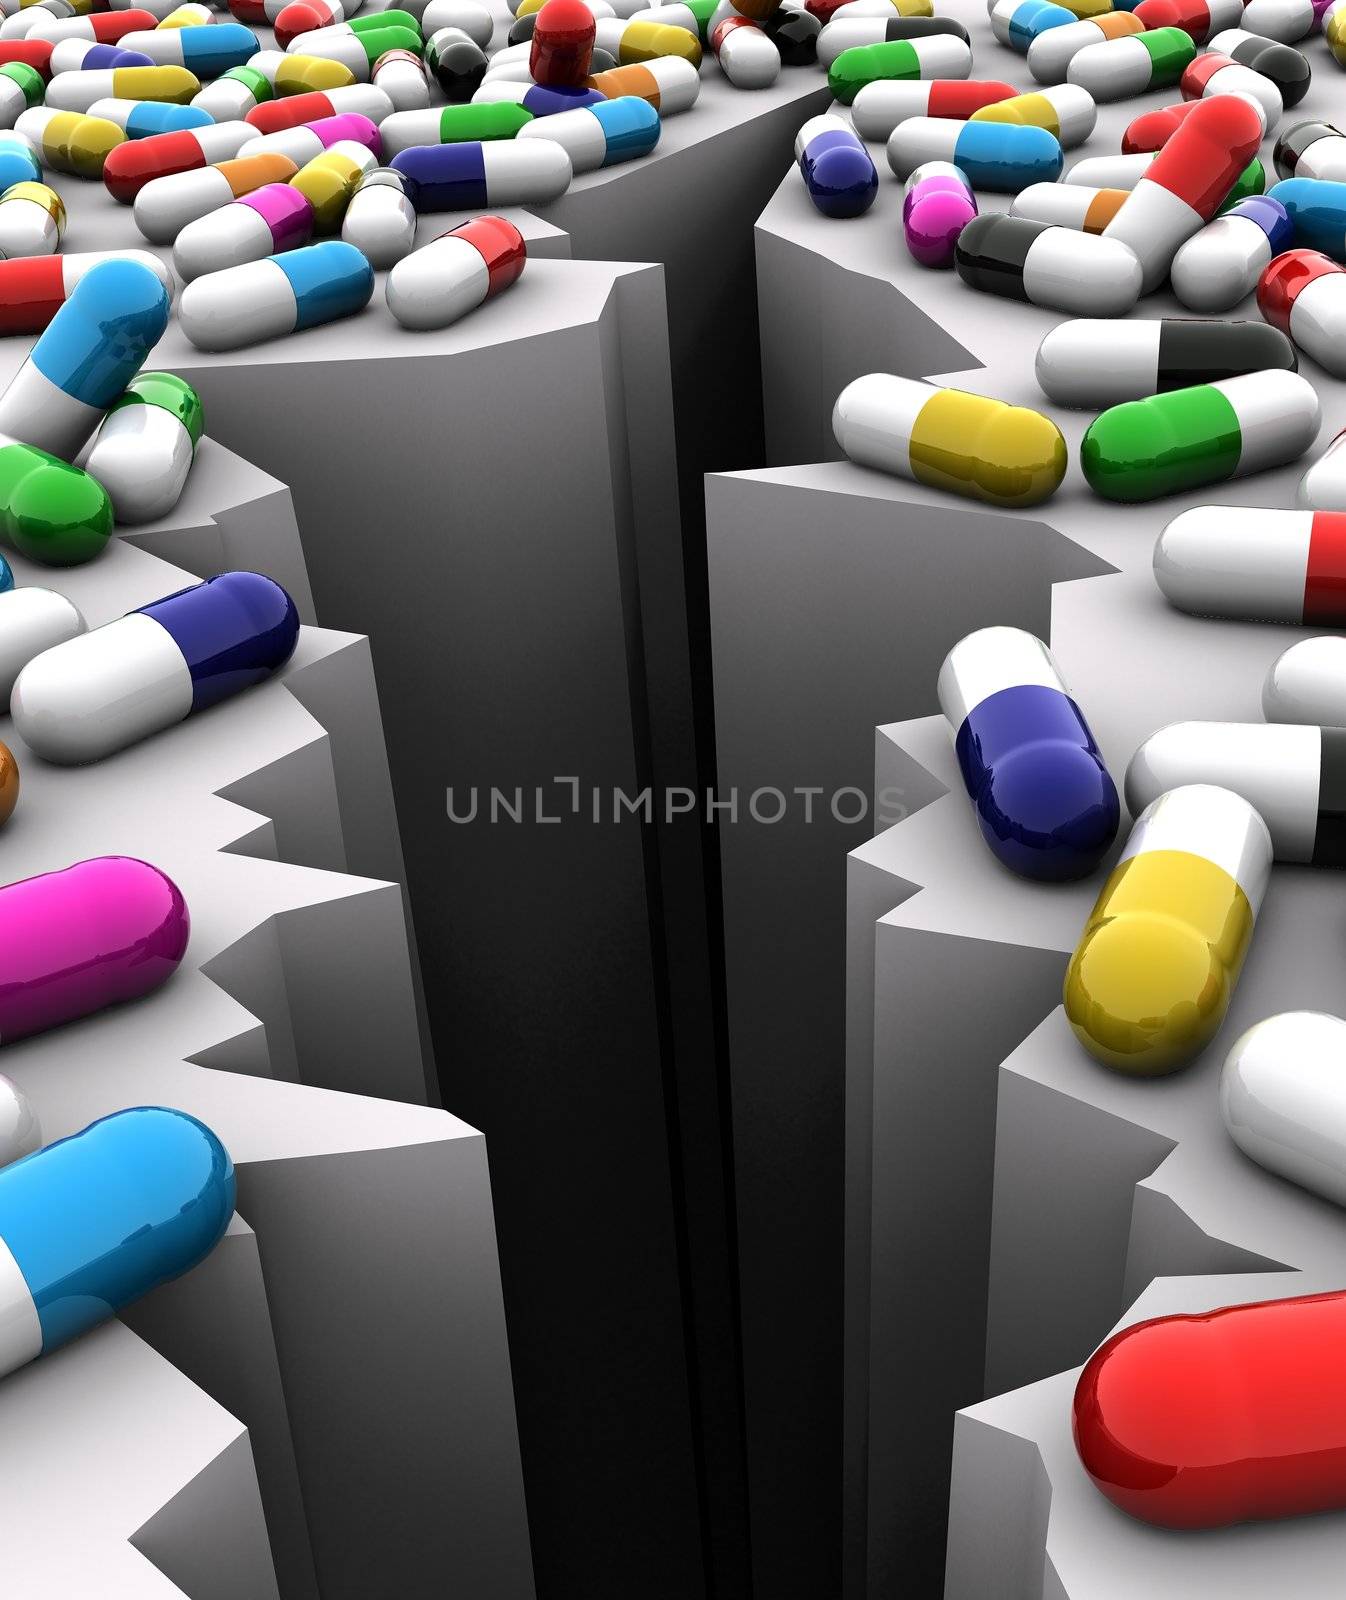 Symbolic concept of hazardous cure, high risk illness treatment or dangers of addiction. Idea is portrayed by dozens of pills in various colors rendered near mouth of endless abyss. Scene rendered on white background.